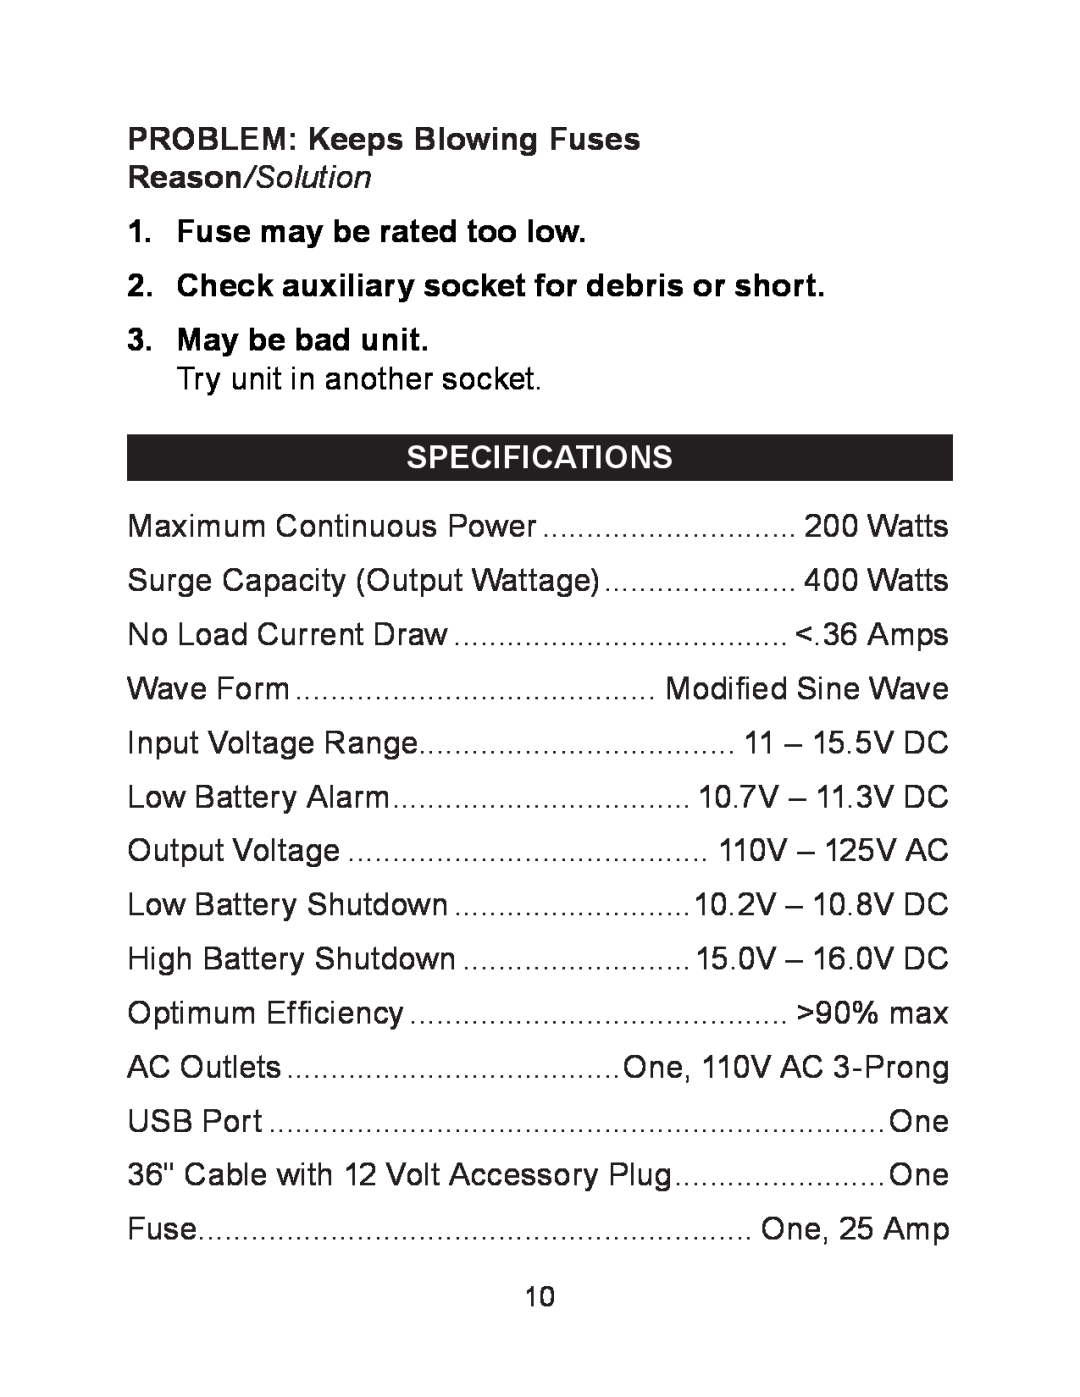 Schumacher PID-200 owner manual Specifications, Problem Keeps Blowing Fuses, Reason/Solution, Fuse may be rated too low 